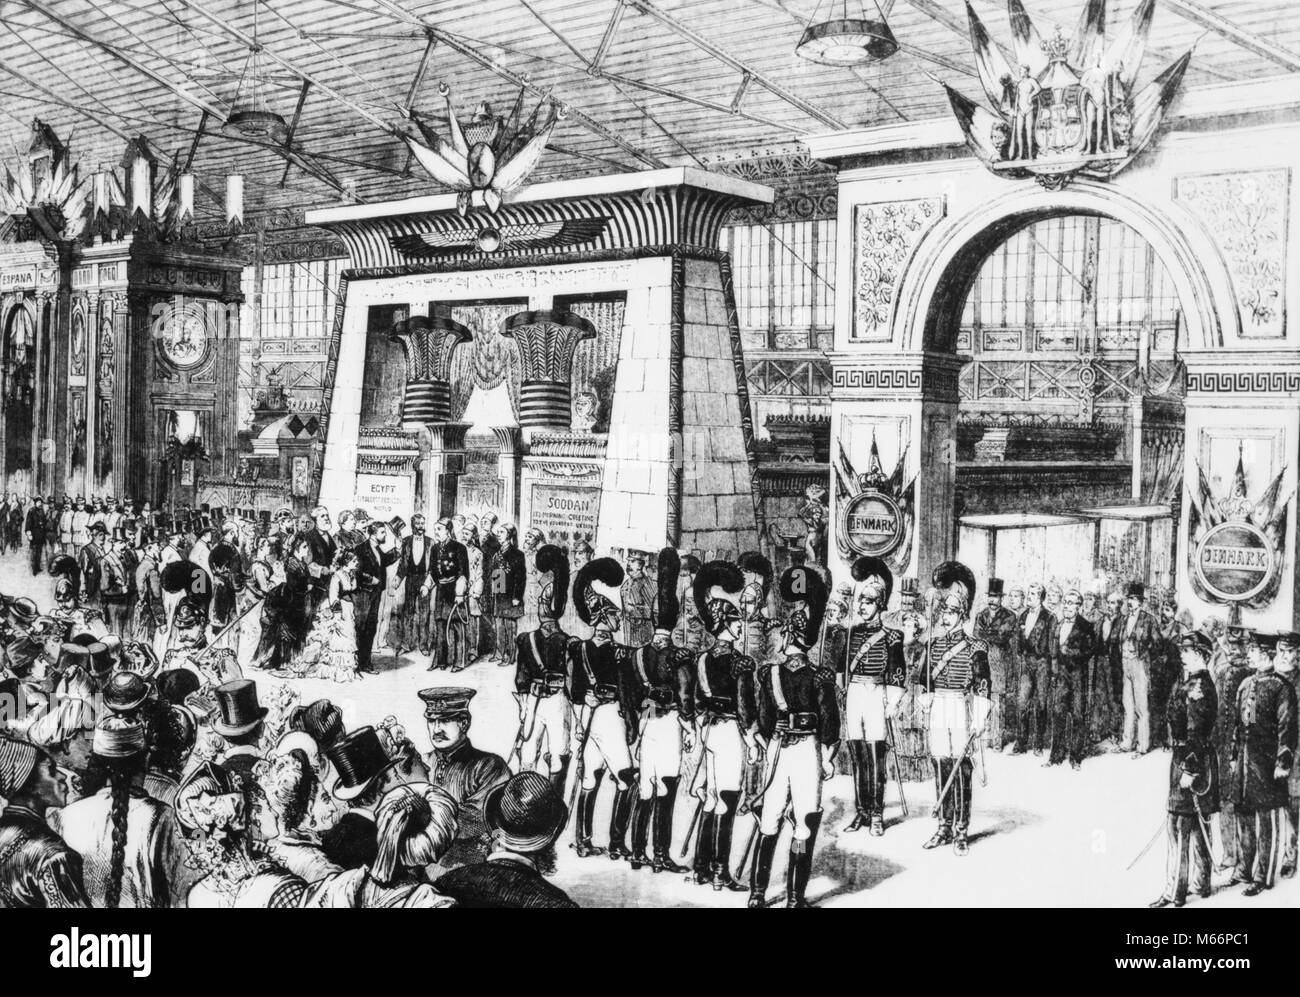 1870s PRESIDENT ULYSSES S. GRANT OPENING THE CENTENNIAL INTERNATIONAL EXHIBITION OF 1876 PHILADELPHIA PENNSYLVANIA USA - q71174 CPC001 HARS OLD FASHIONED Stock Photo